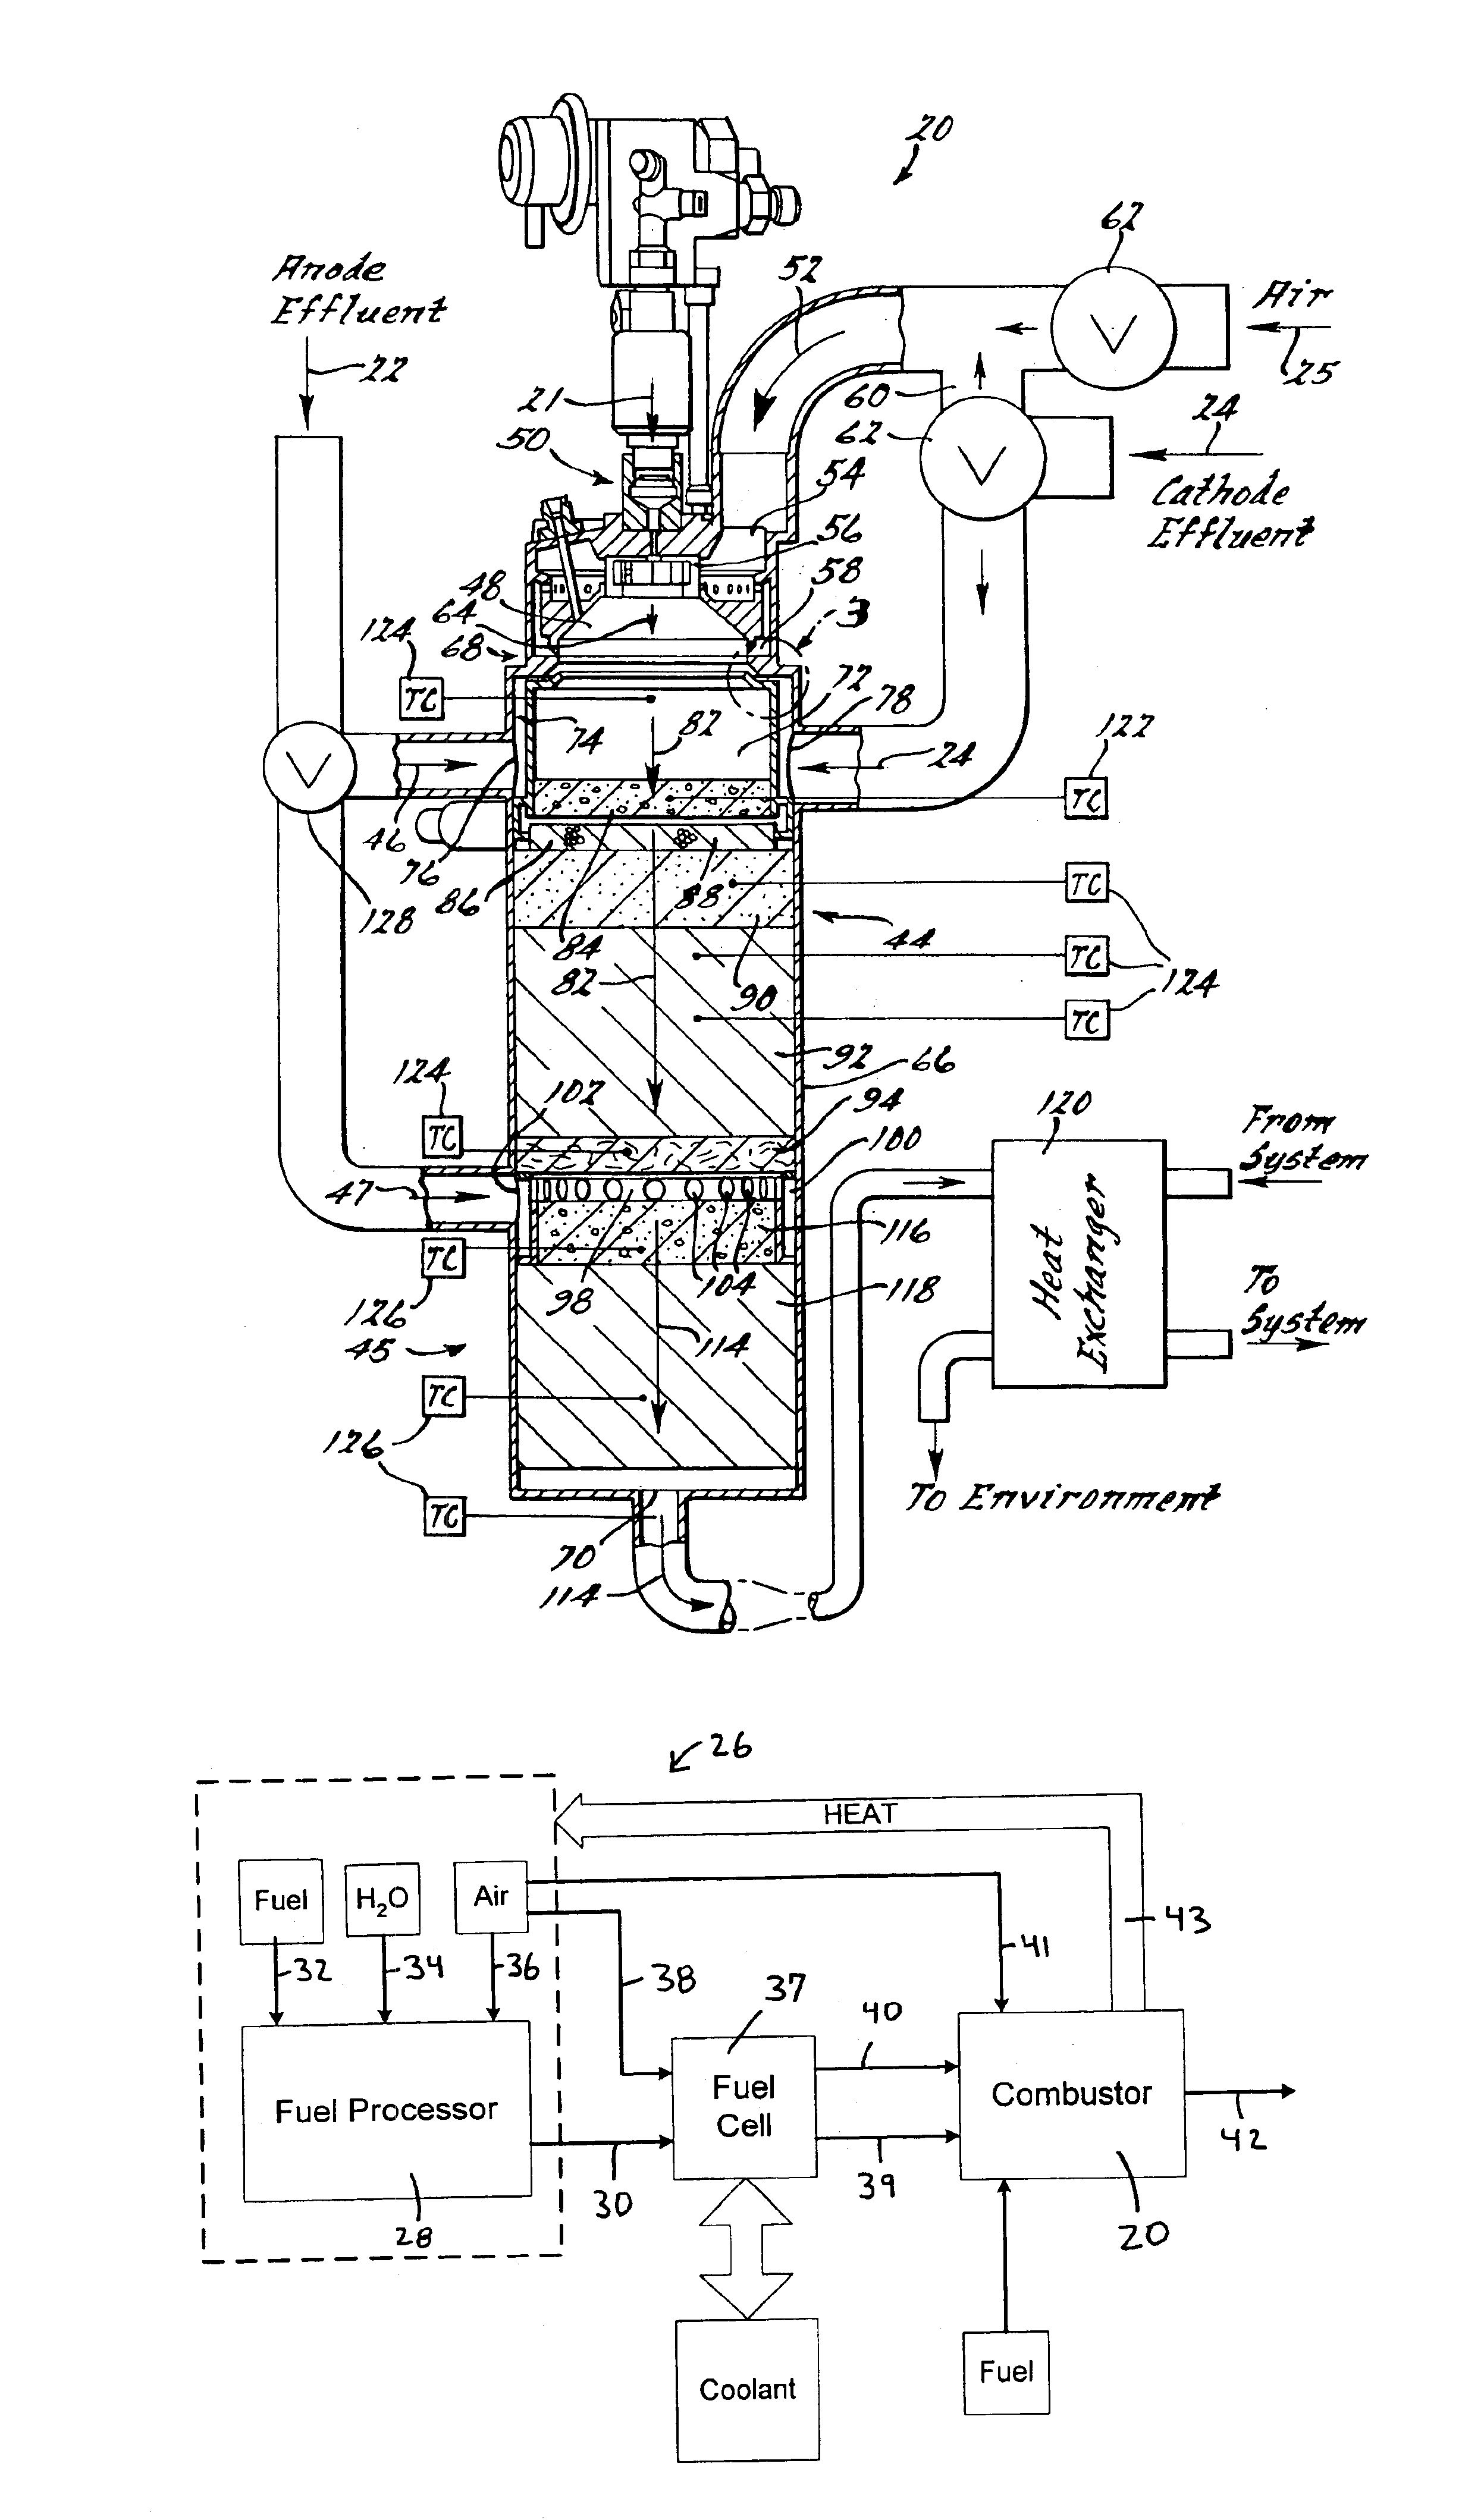 Multiple port catalytic combustion device and method of operating same